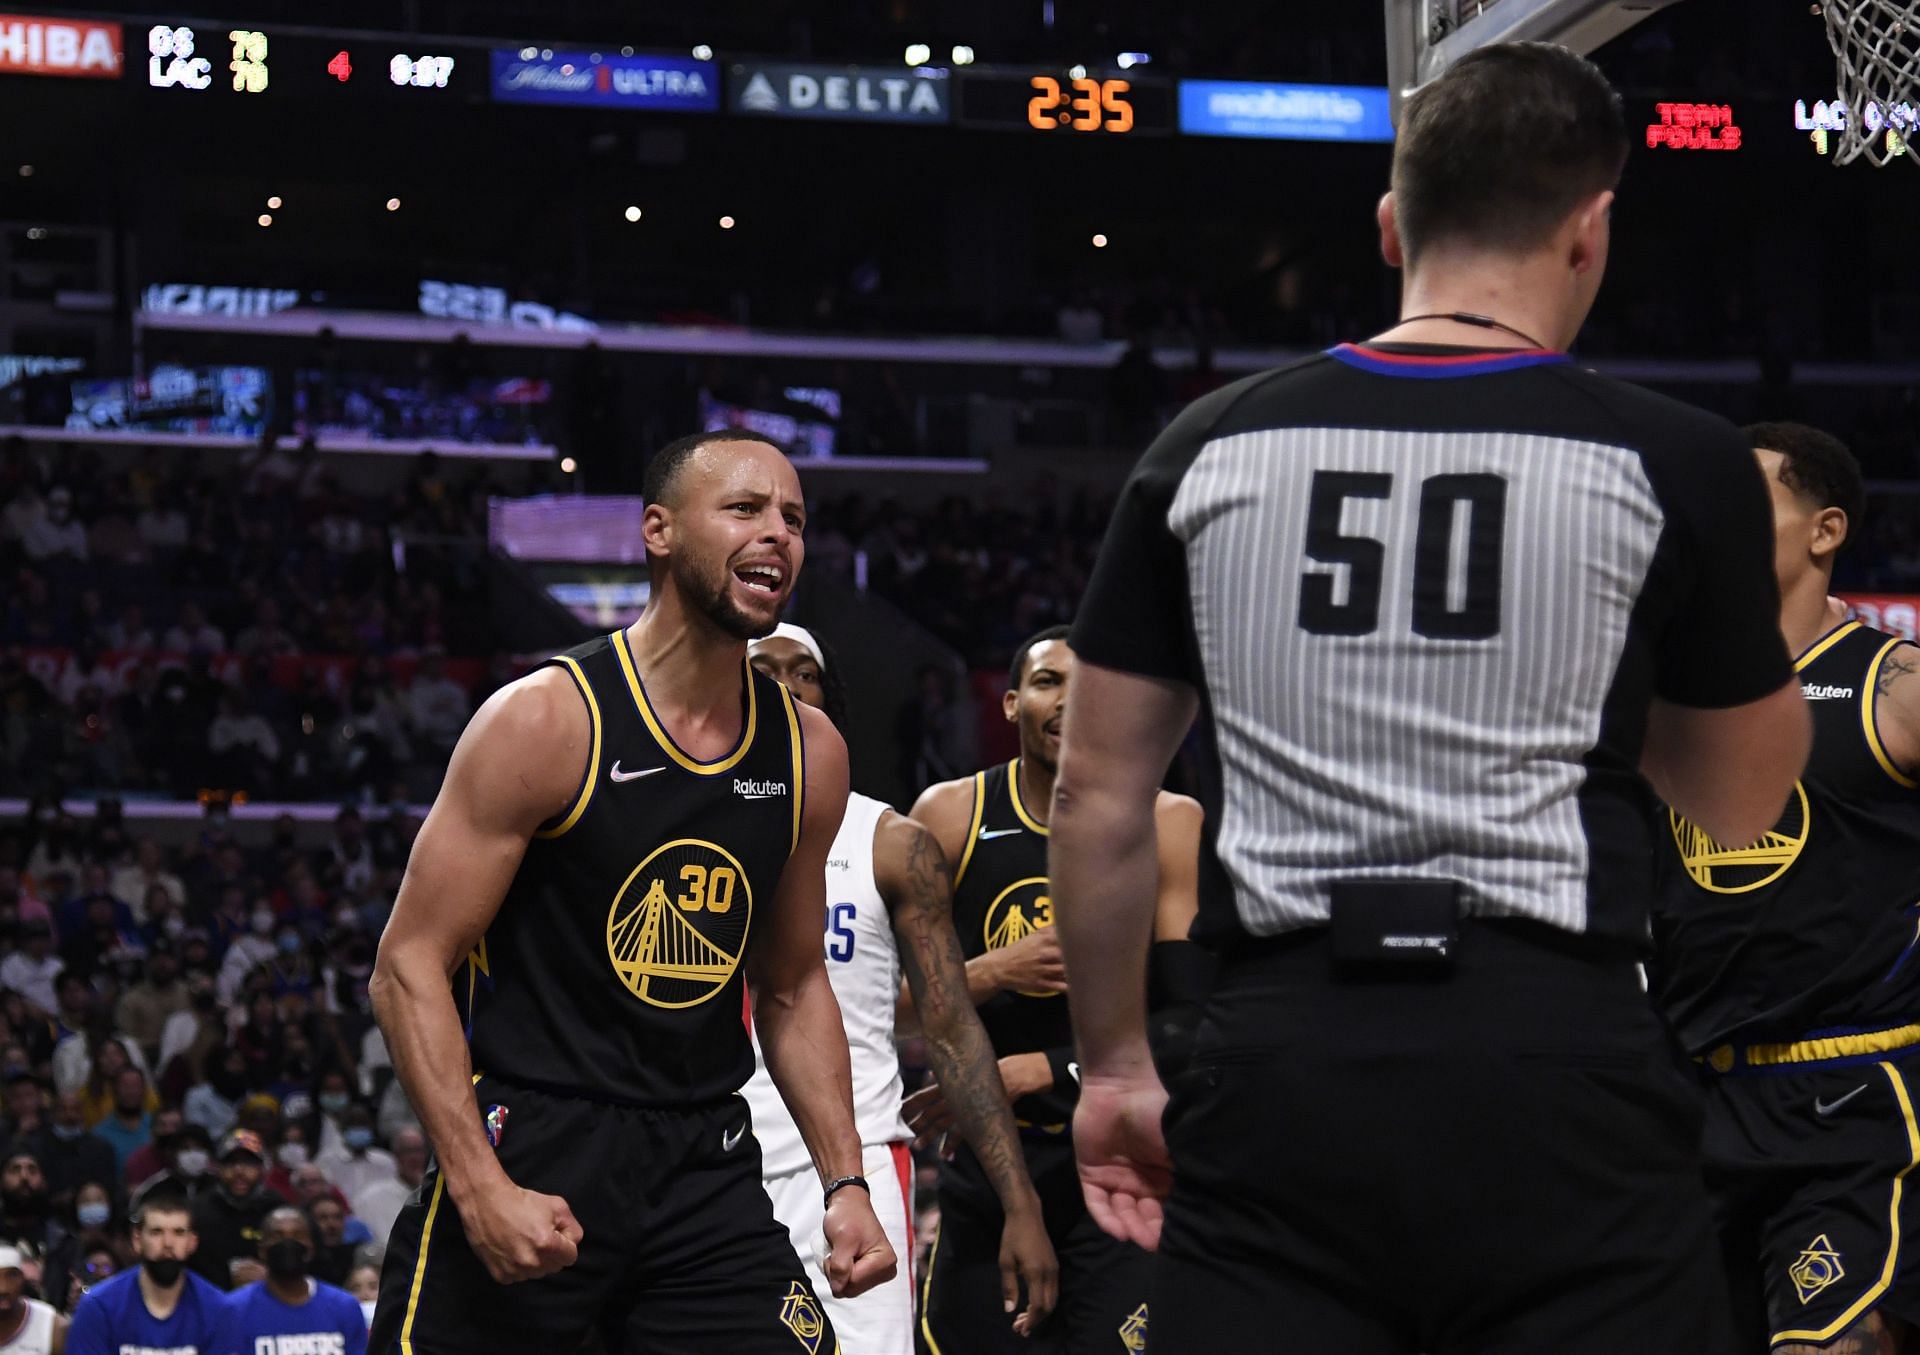 Golden State Warriors superstar Stephen Curry continues to give defenses nightmares